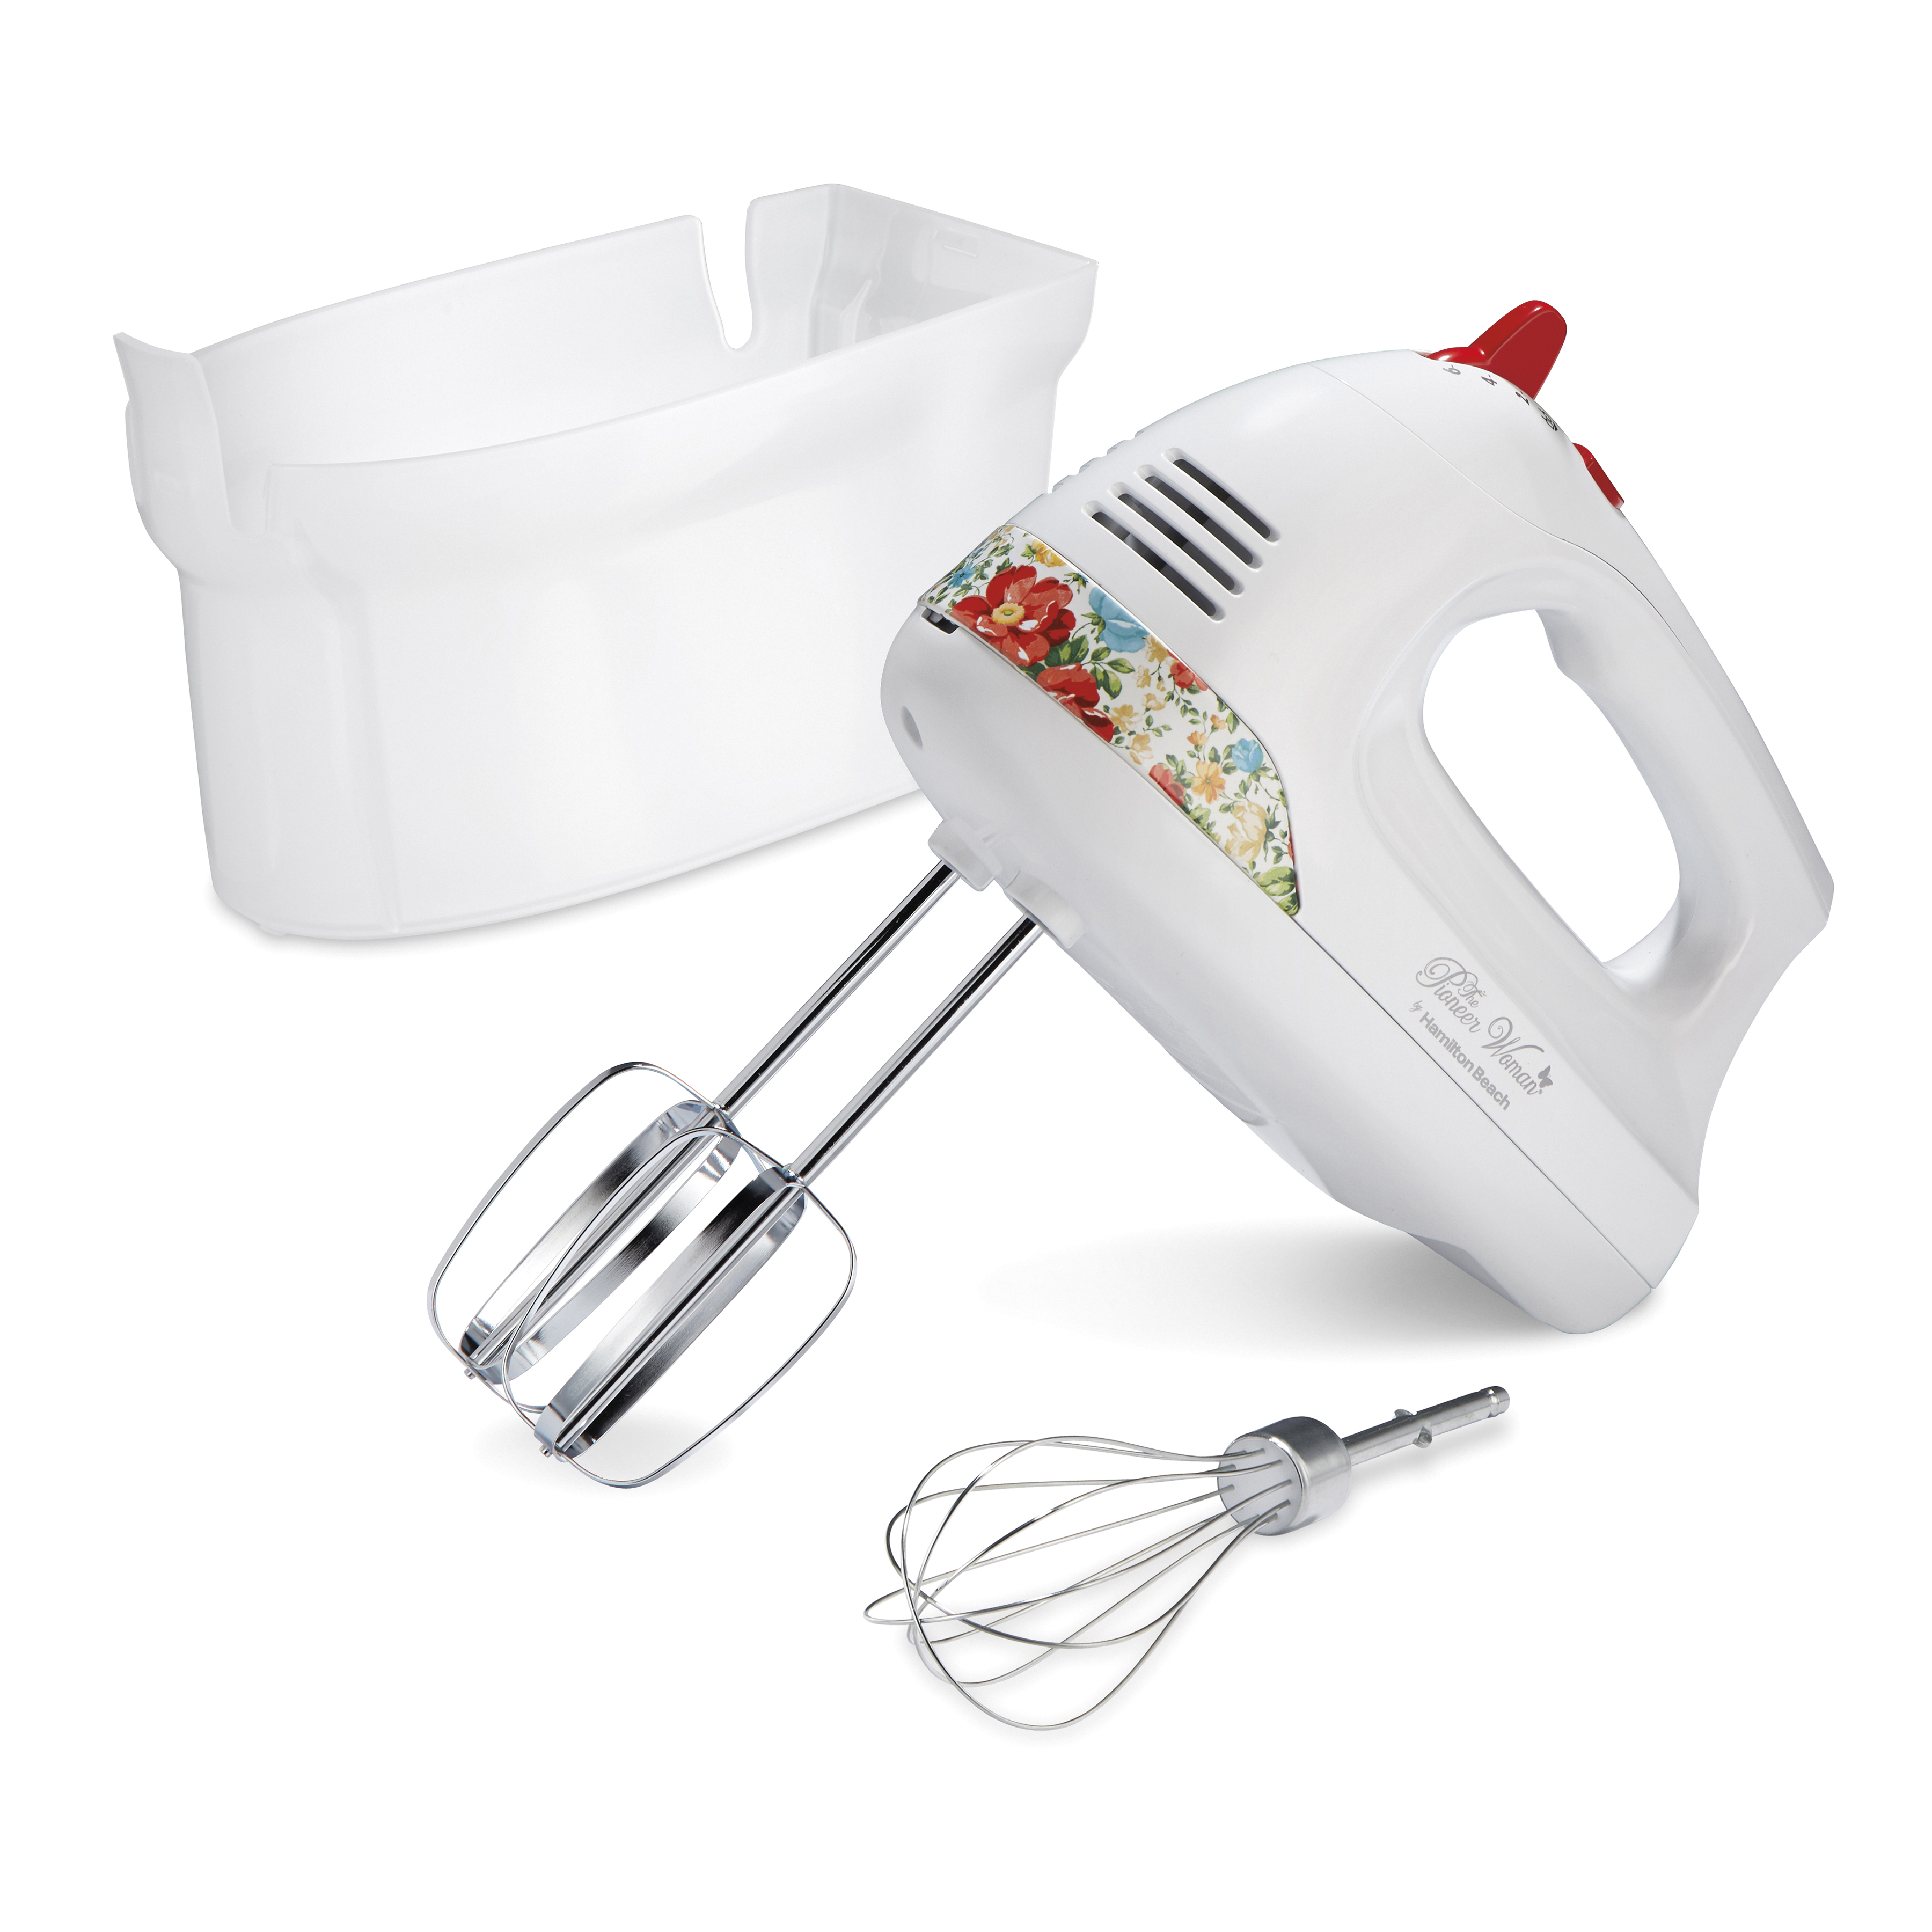 The Pioneer Woman 6-Speed Hand Mixer with Vintage Floral Design and Snap-On Case - image 2 of 7